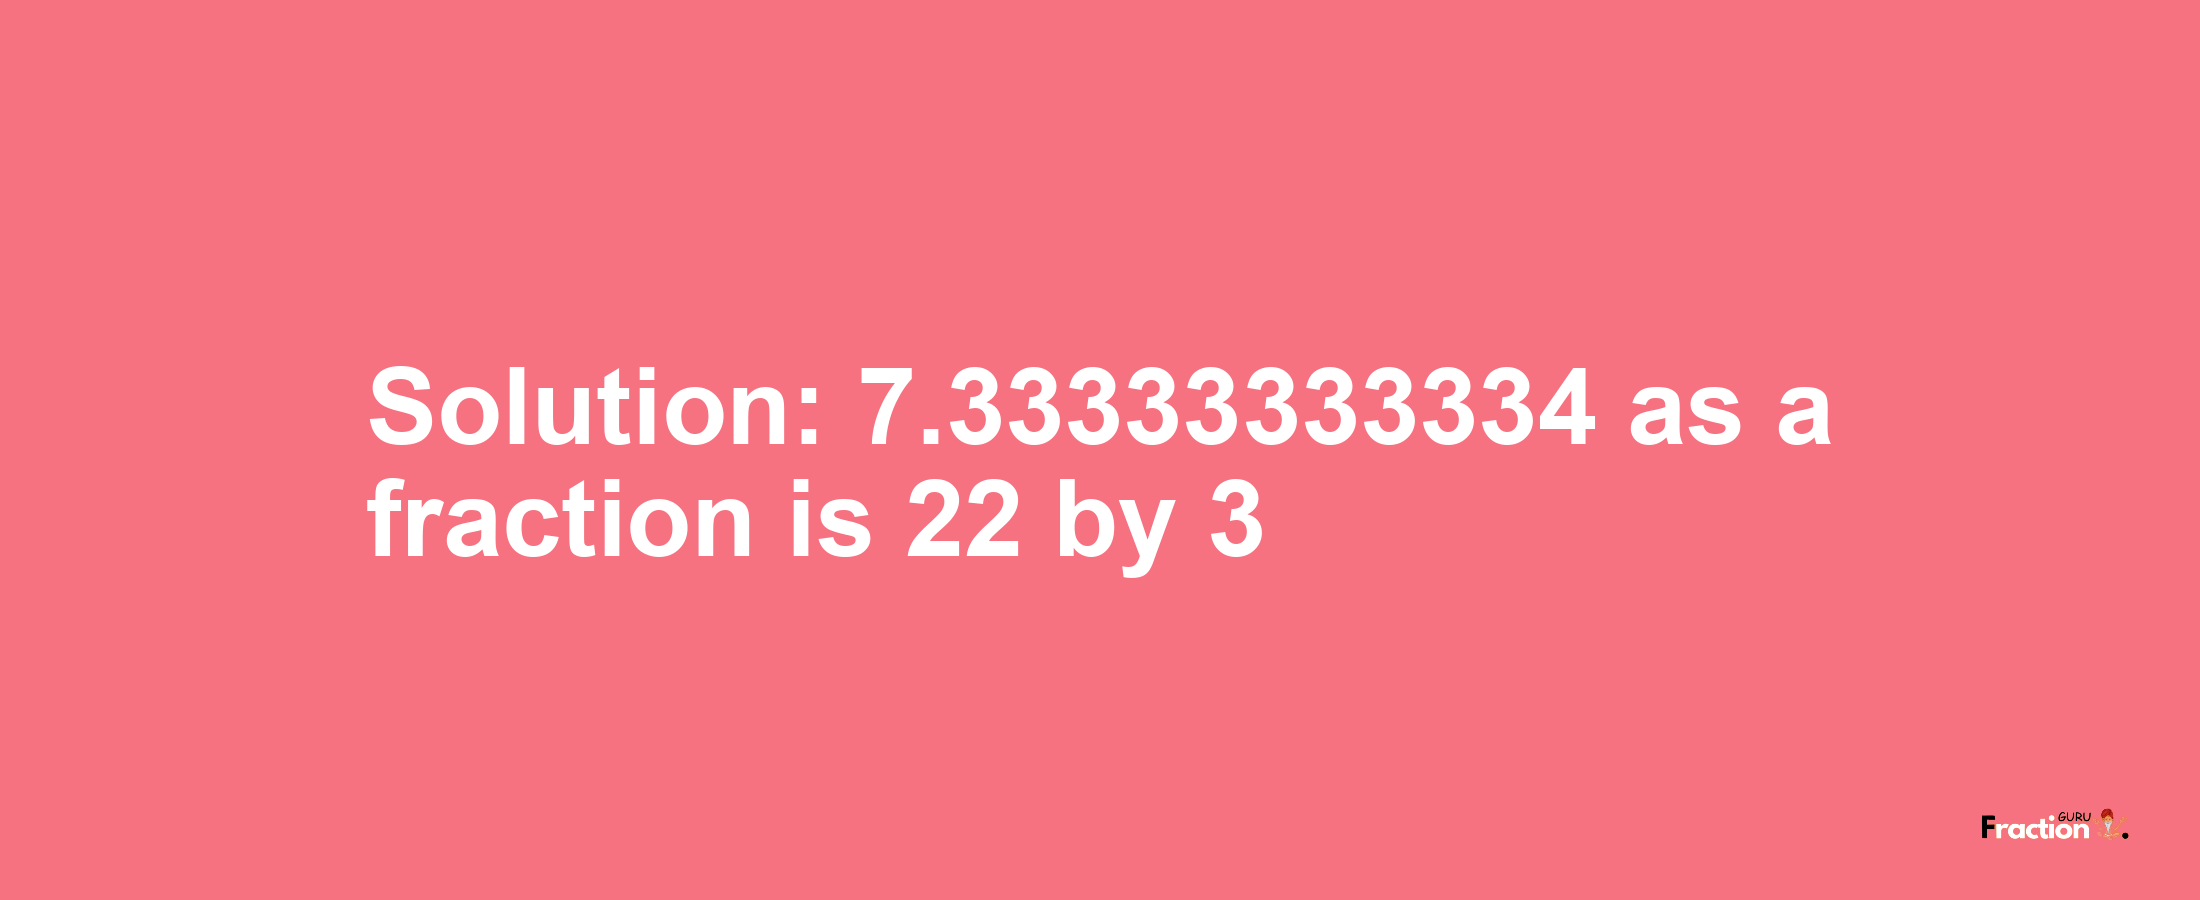 Solution:7.33333333334 as a fraction is 22/3